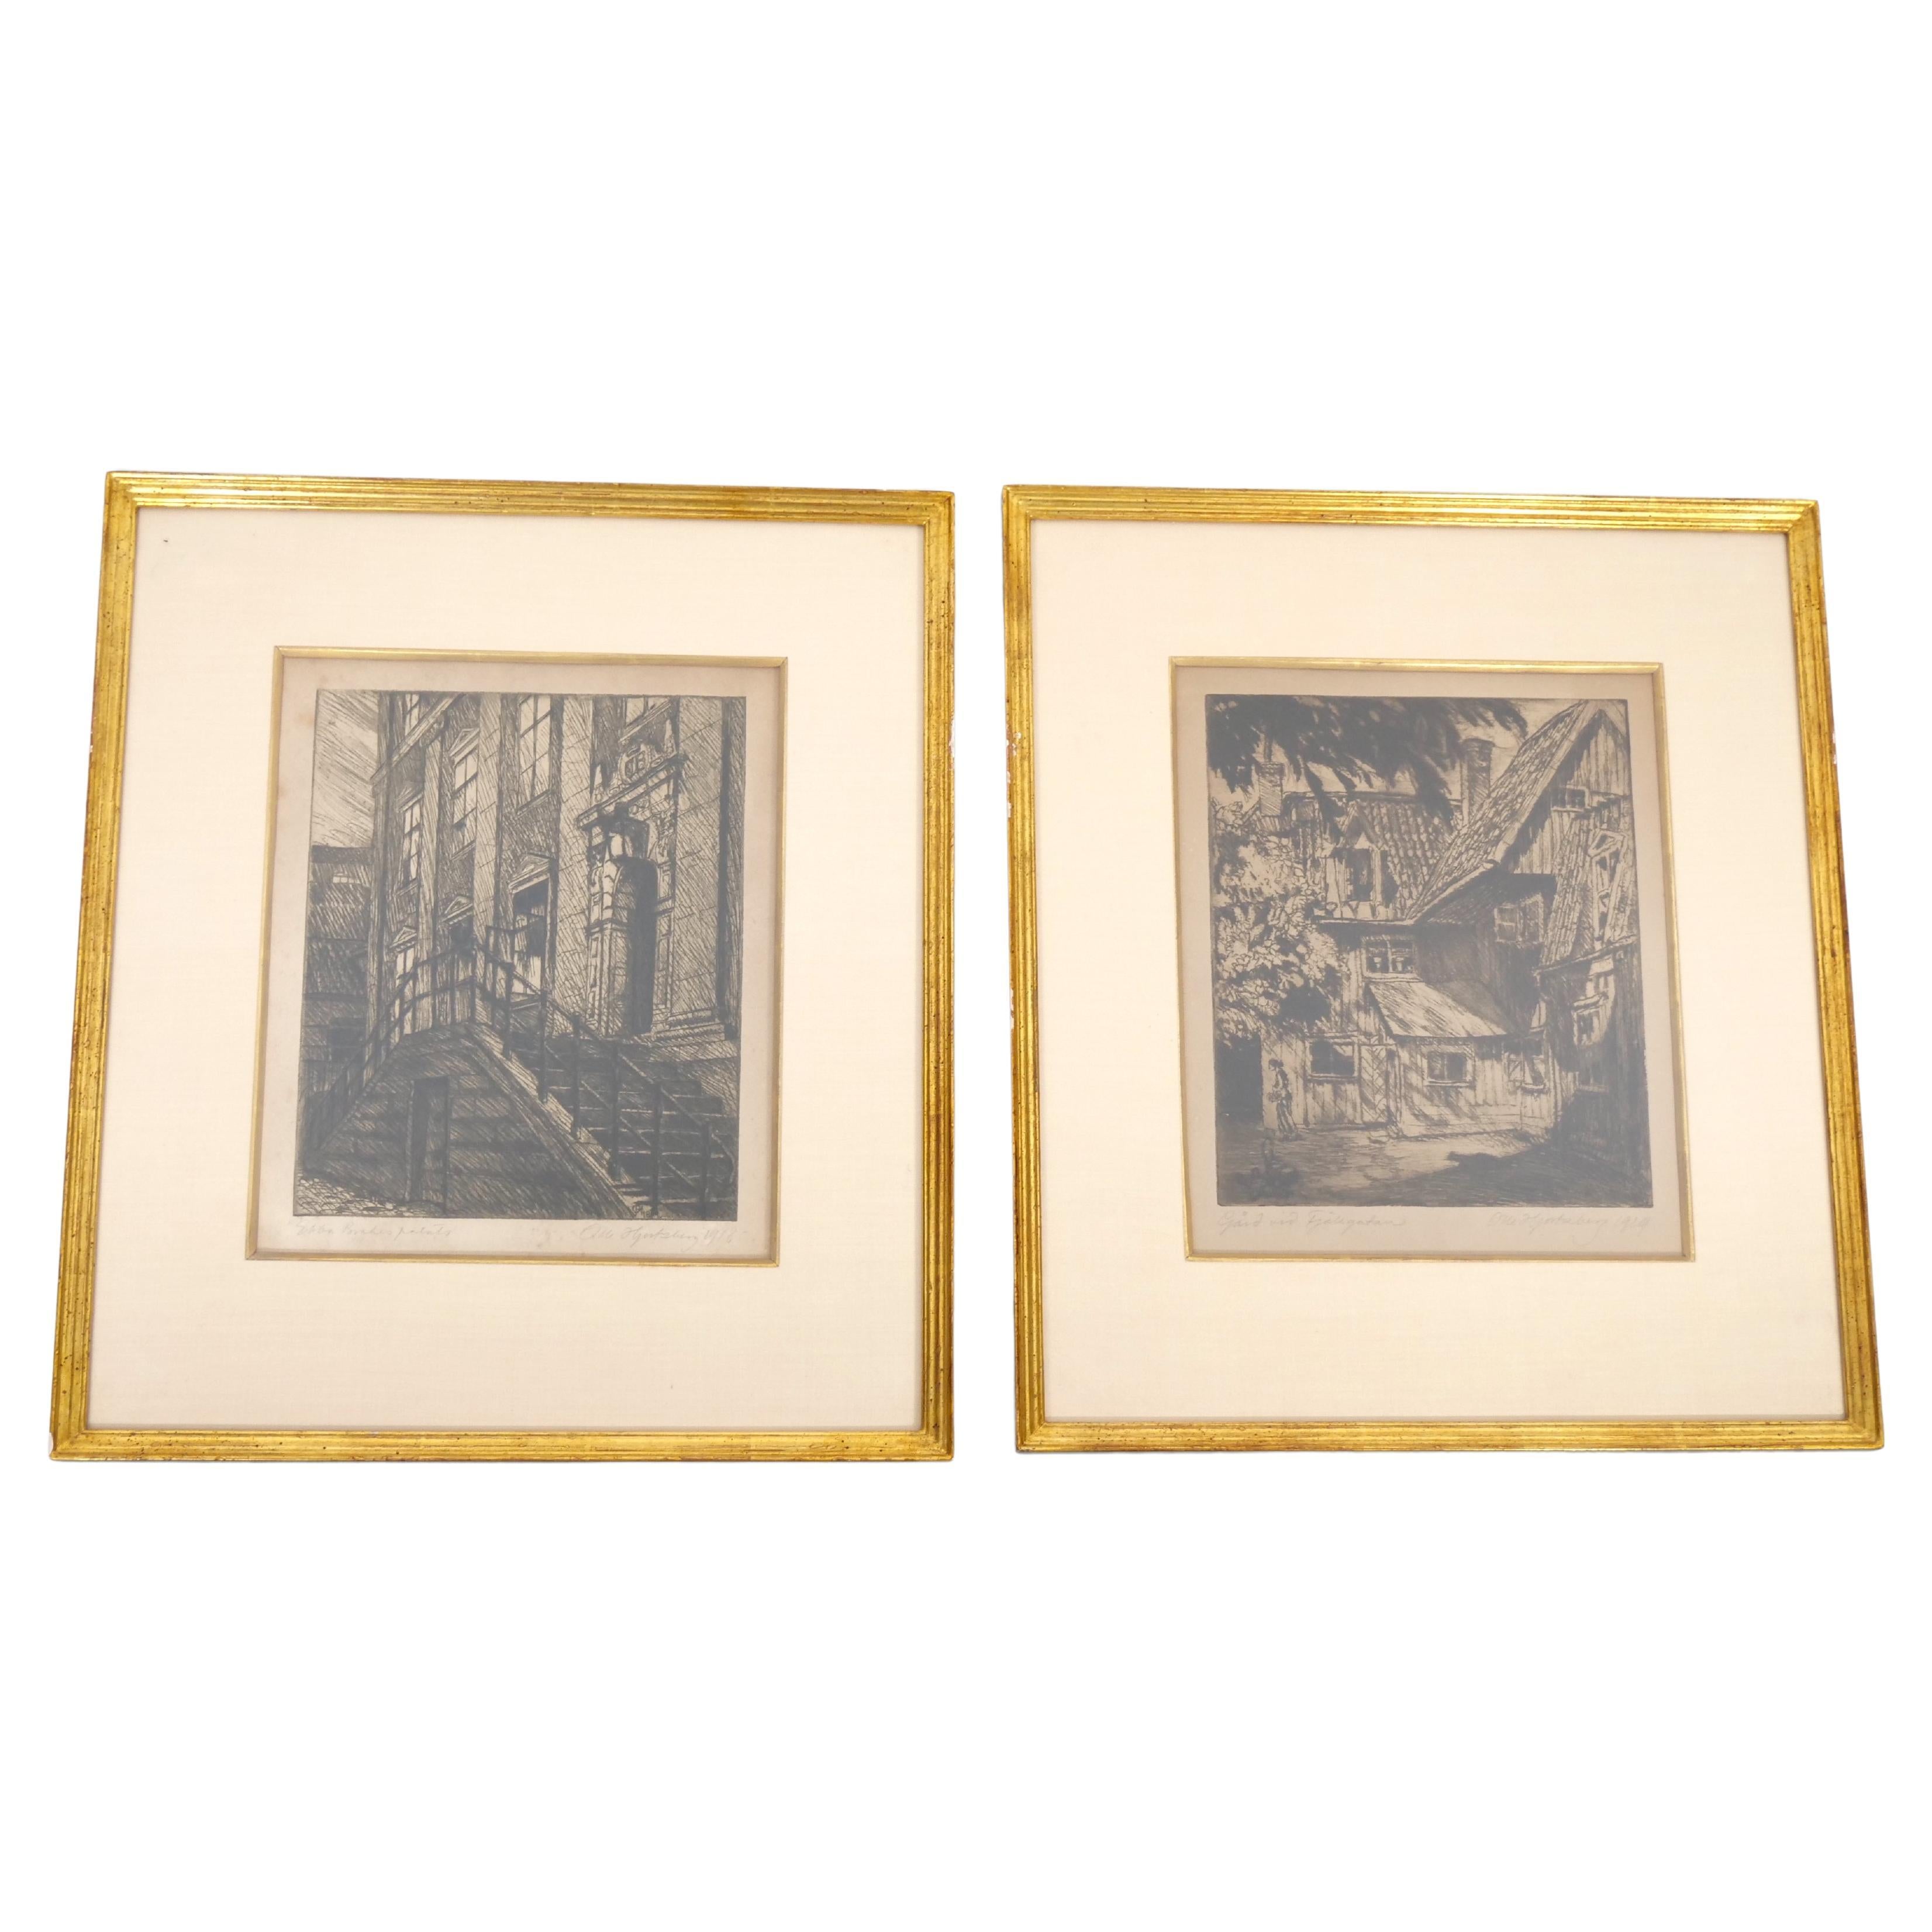 Two Framed Architectural Etchings by Olle Hjortzberg (1872-1959) For Sale